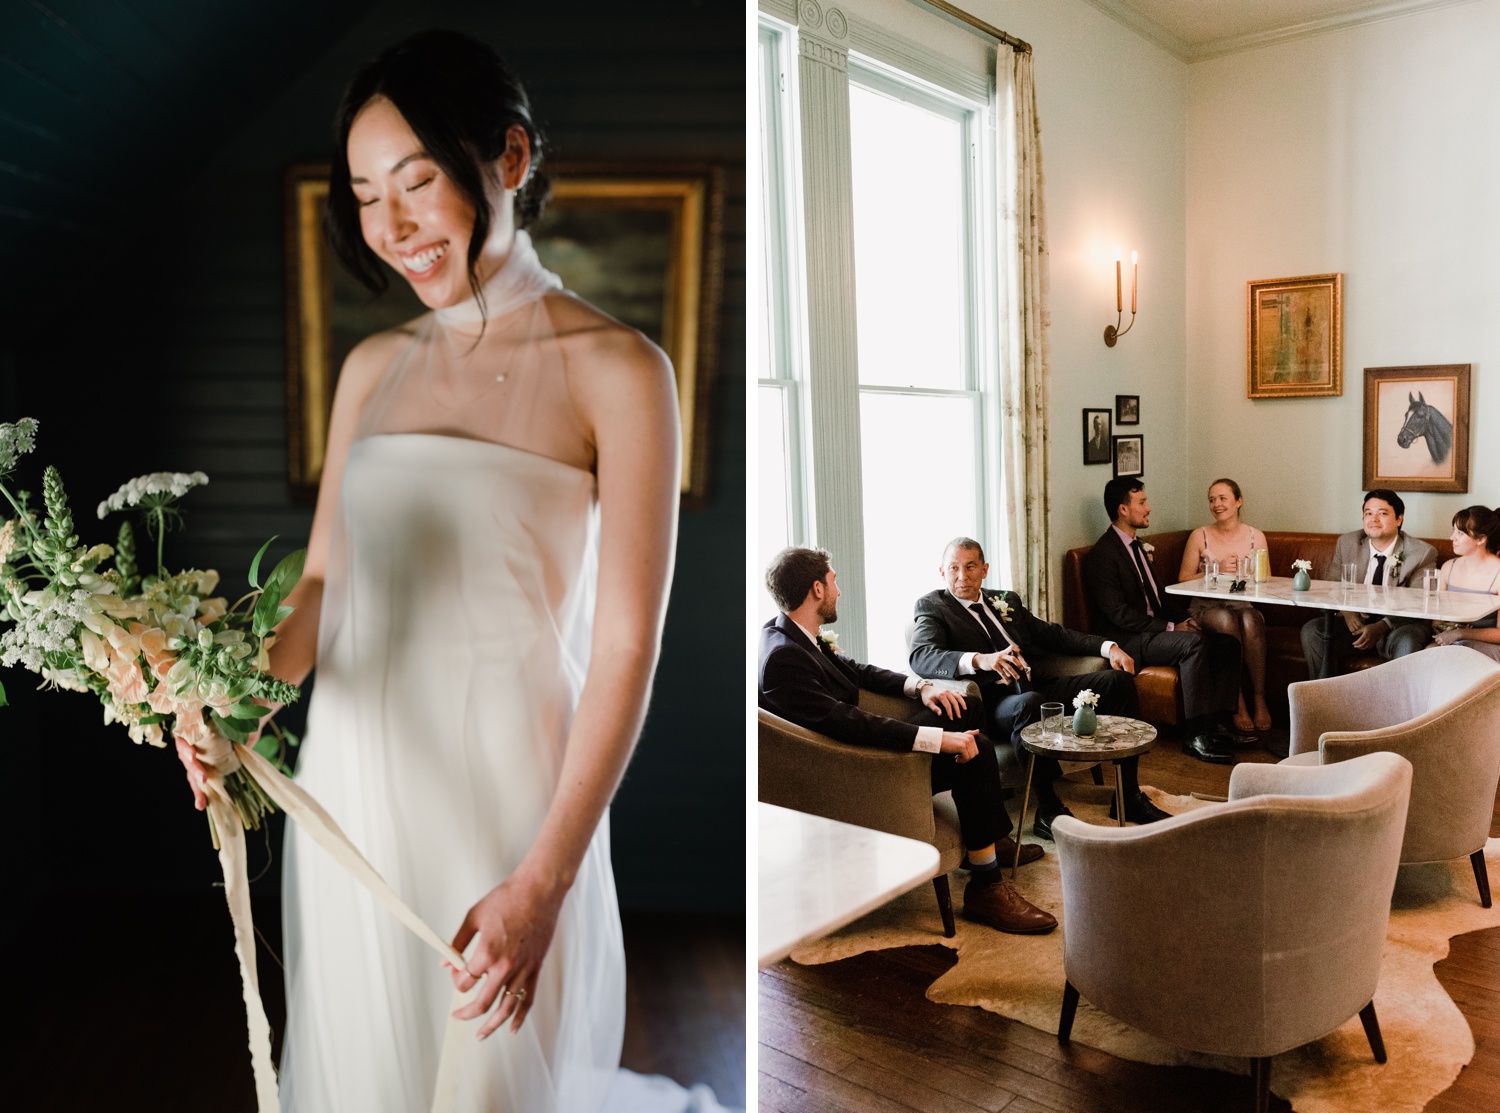 How to find your Austin wedding photographer